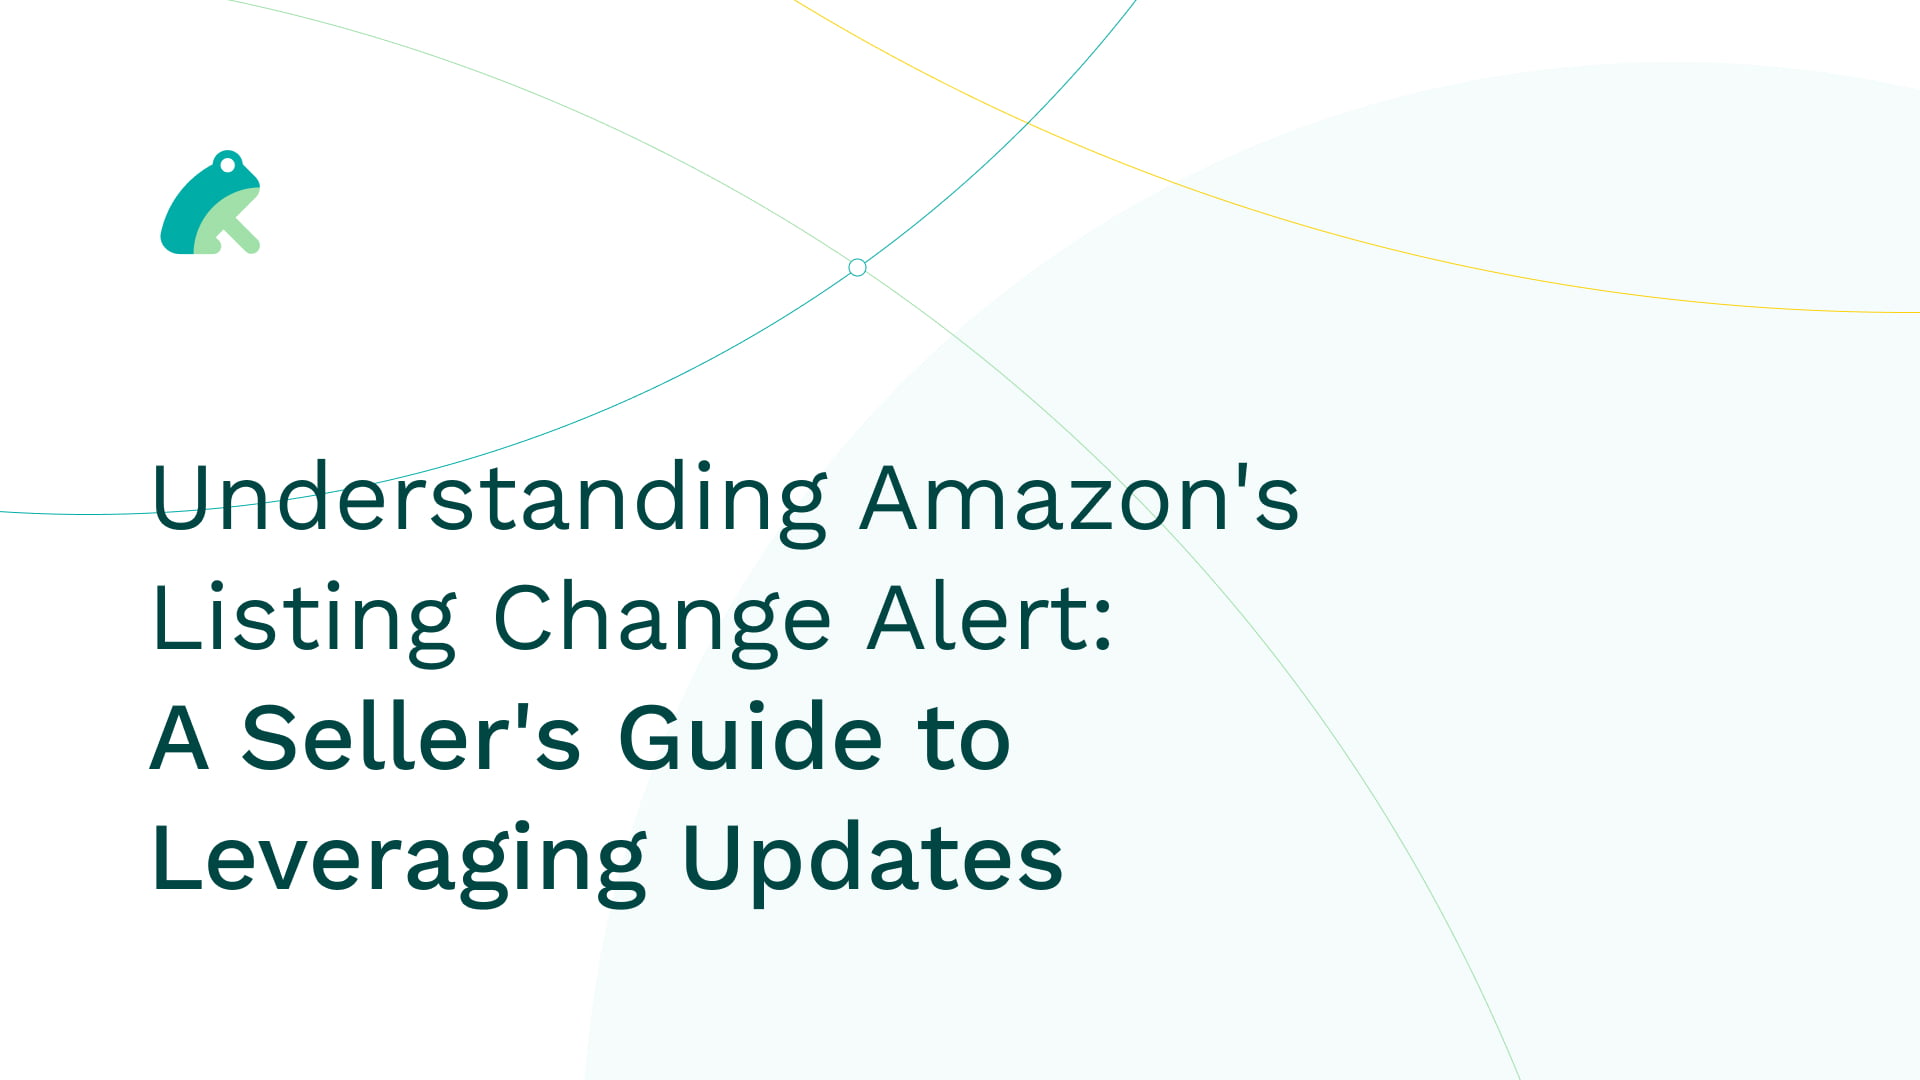 Understanding Amazon's Listing Change Alert: A Seller's Guide to Leveraging Updates